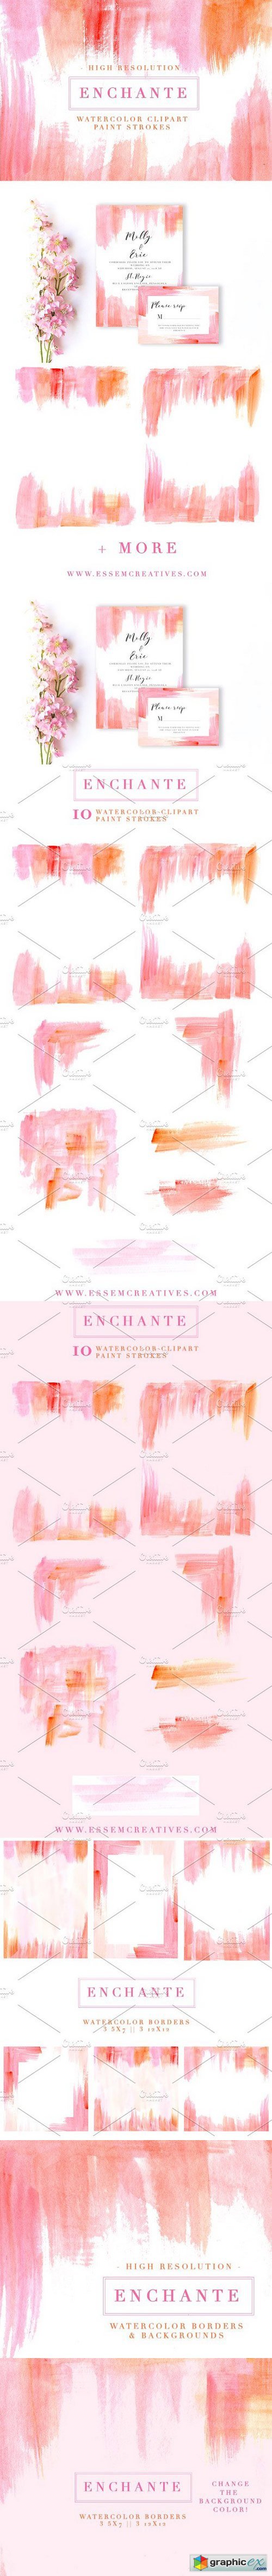 Pink Paint Strokes Clipart & Borders